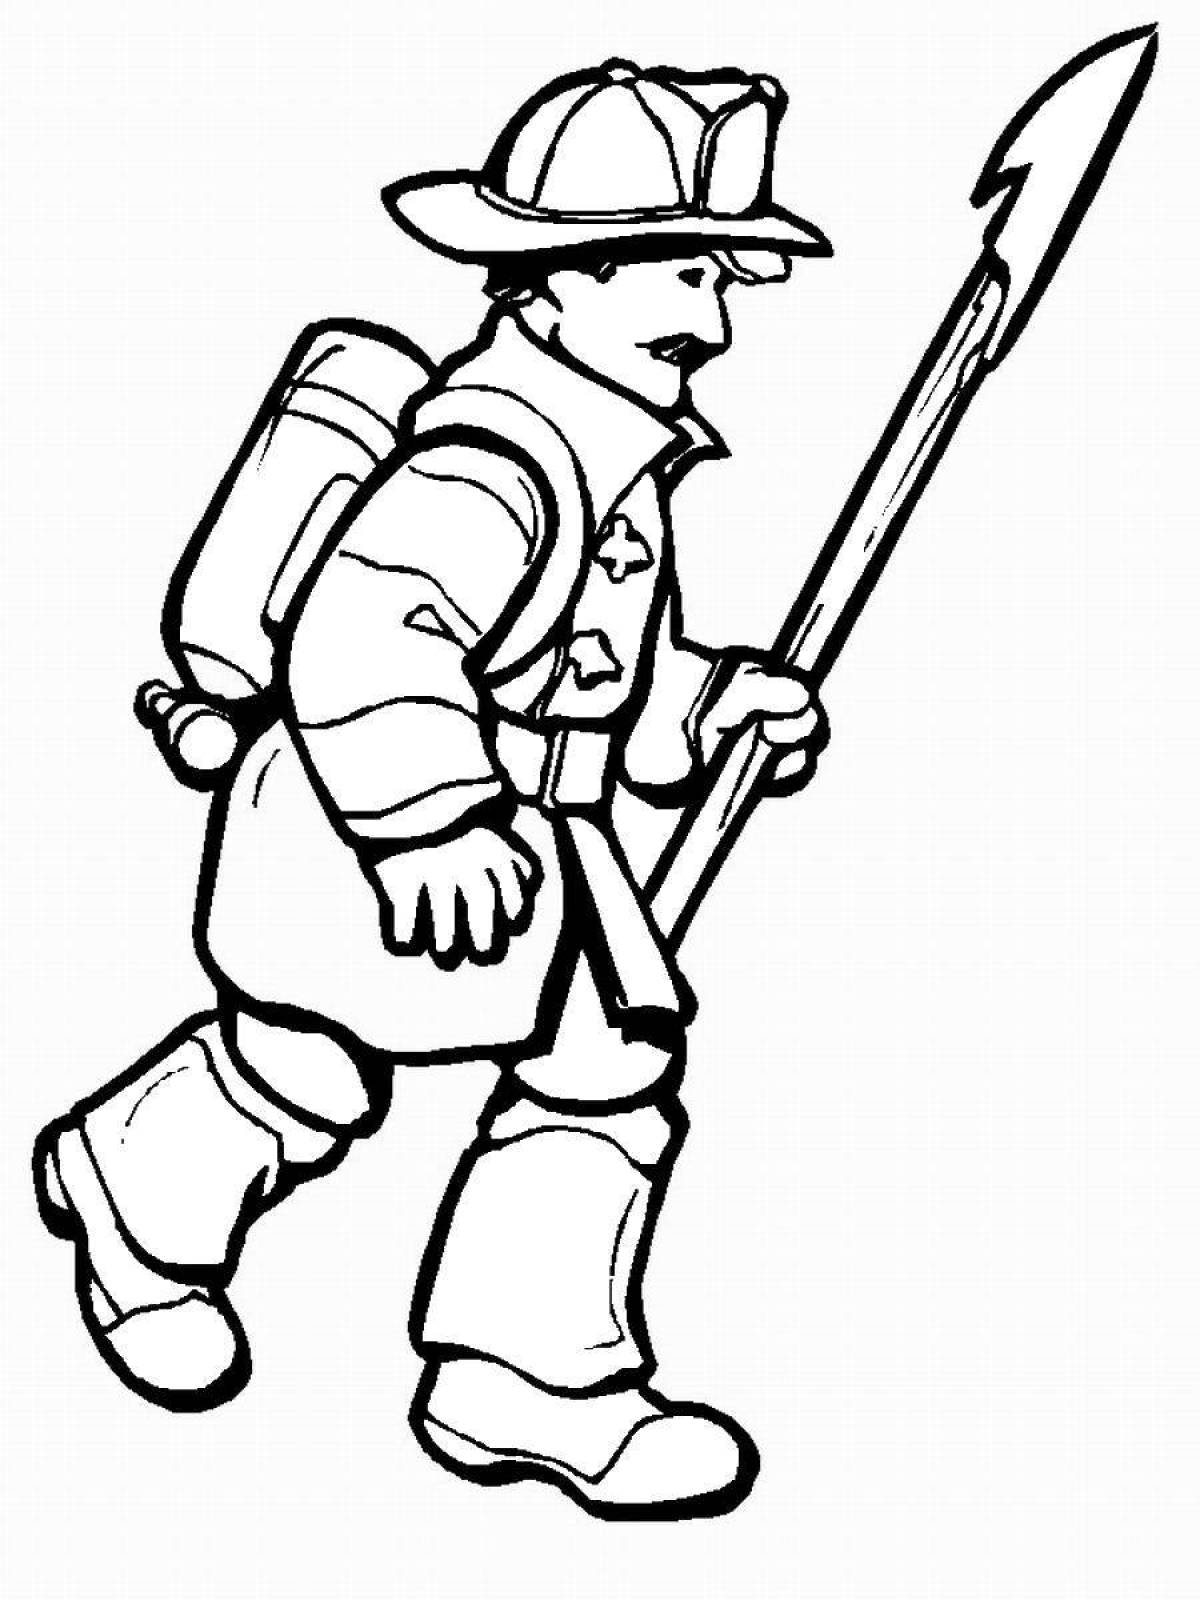 Courageous fireman coloring page